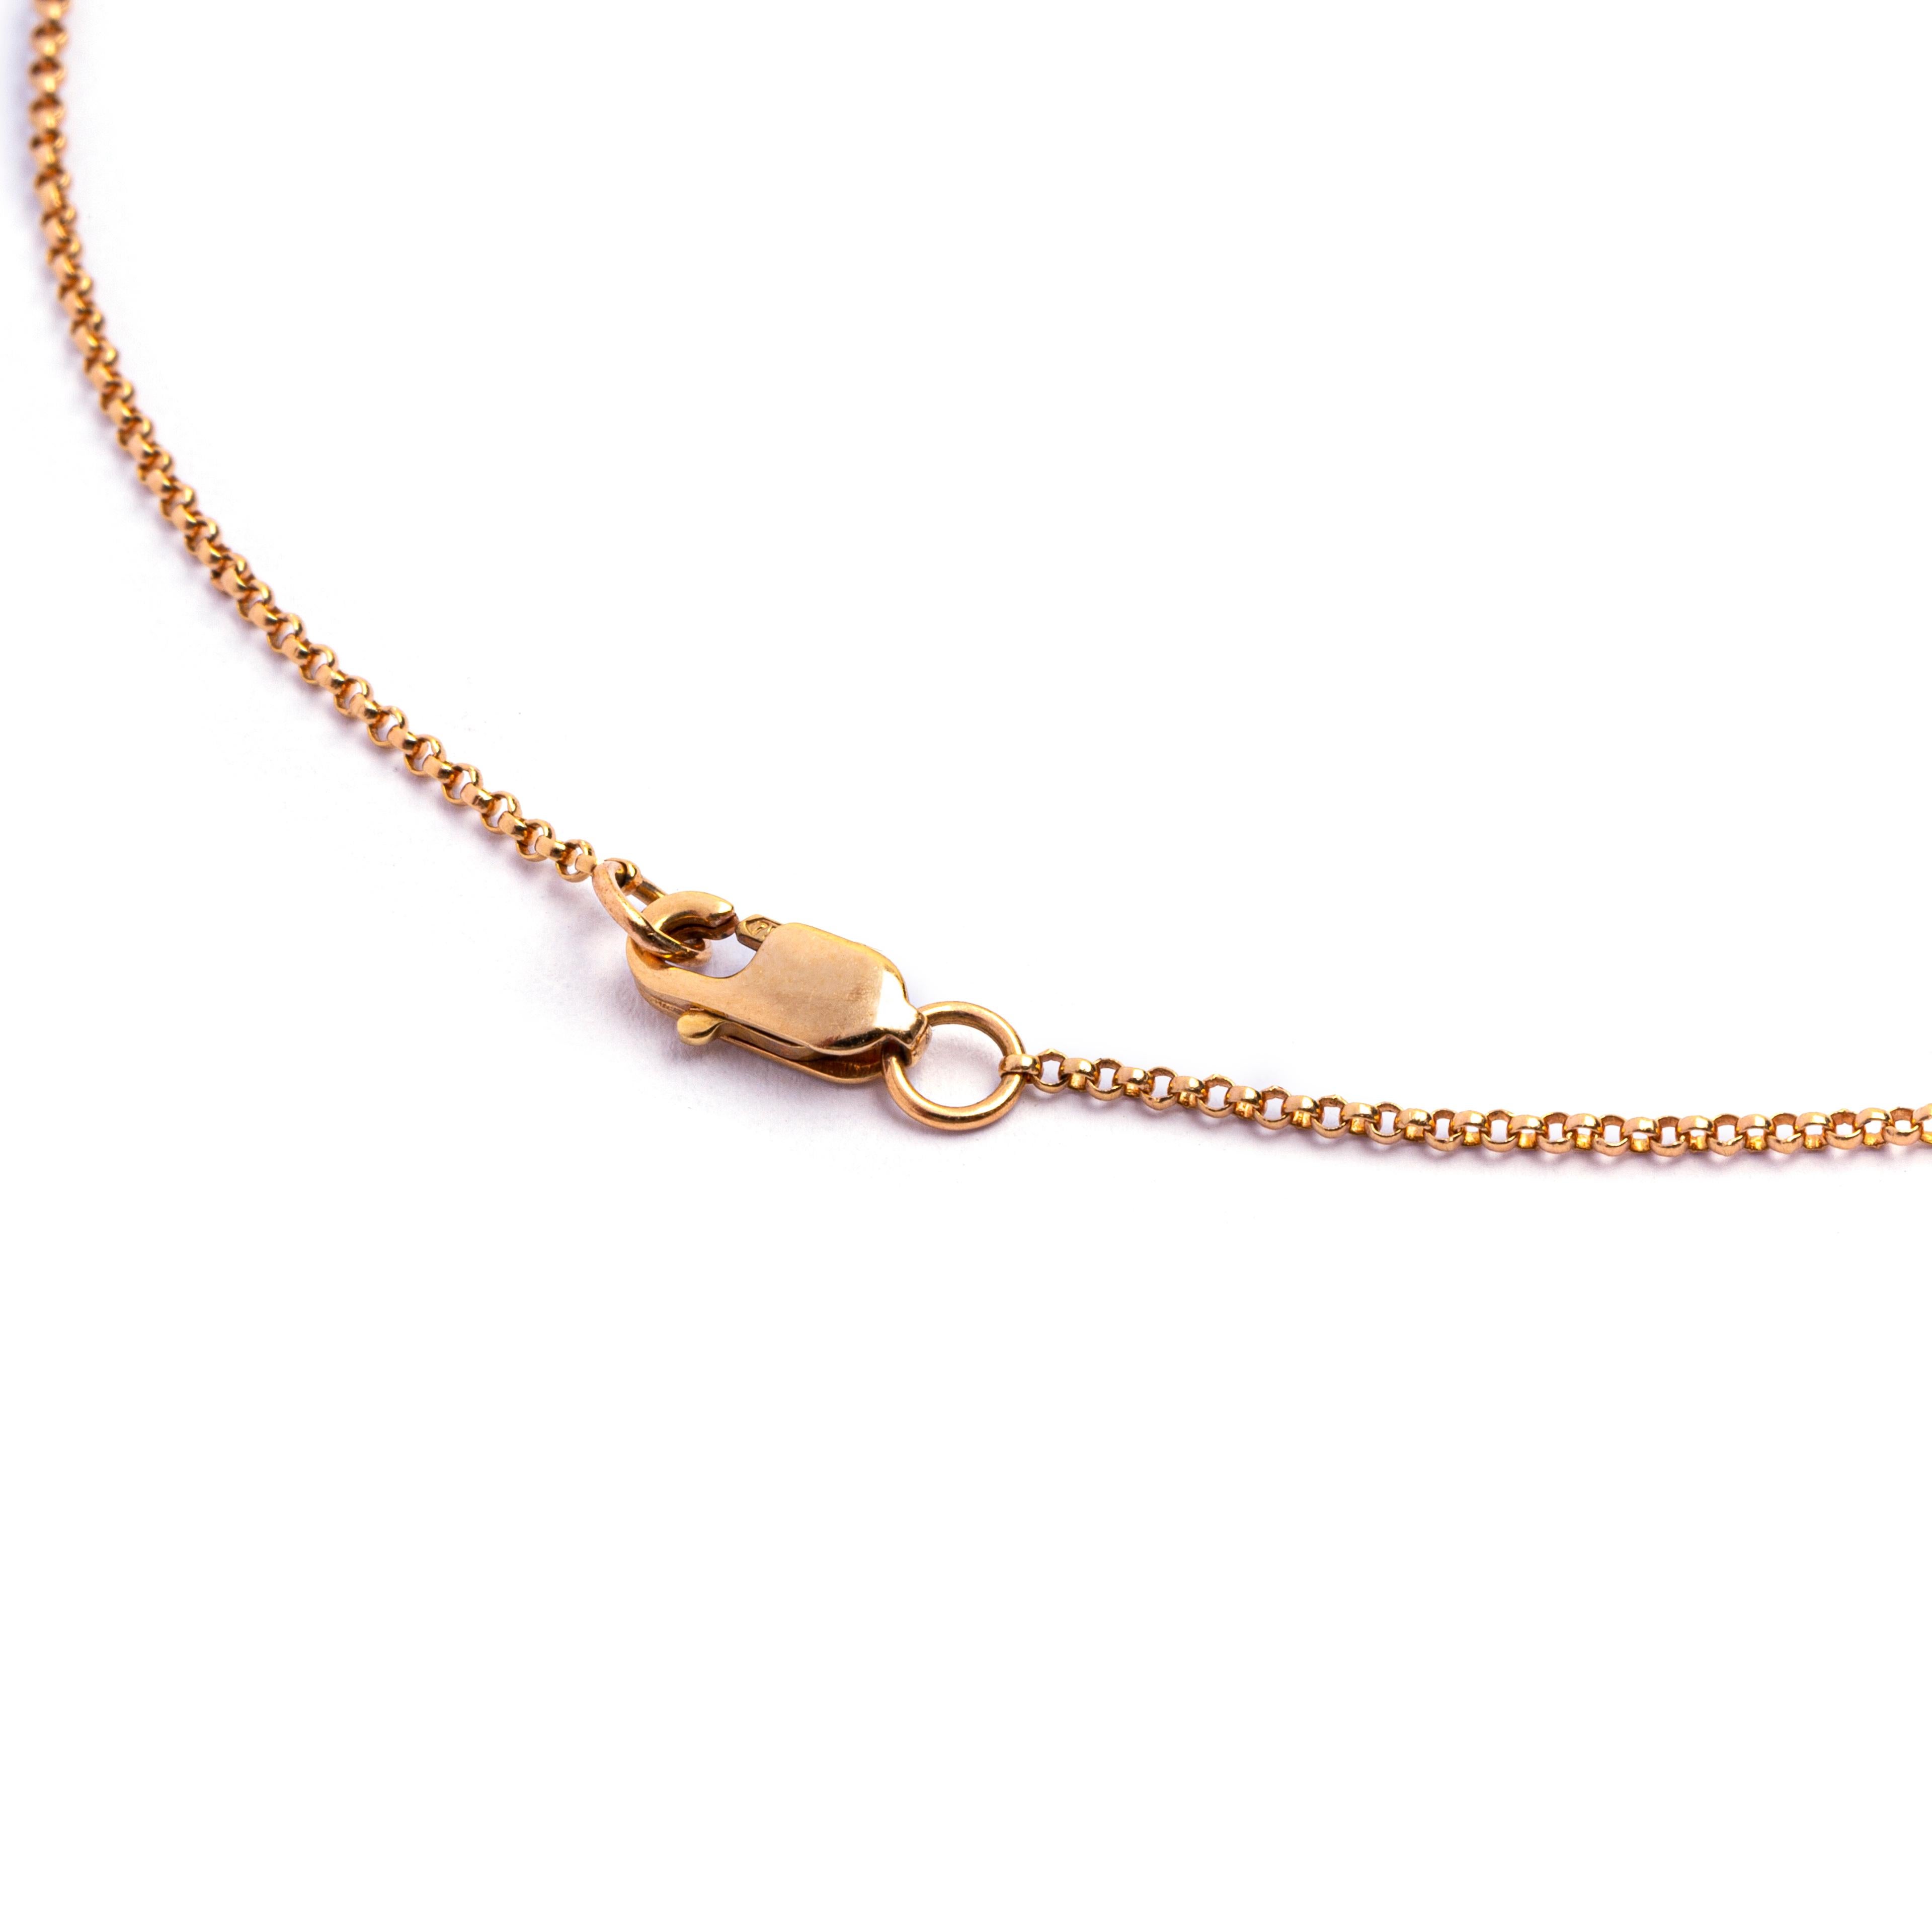 Alex Jona design collection, hand crafted in Italy, 18 karat rose gold, diamond pavé pebble pendant necklace, set with 96 white diamonds weighing 2.03 carats, F color, VVS1 clarity.  Total length: 16 in./40.5 cm.
Alex Jona jewels stand out, not